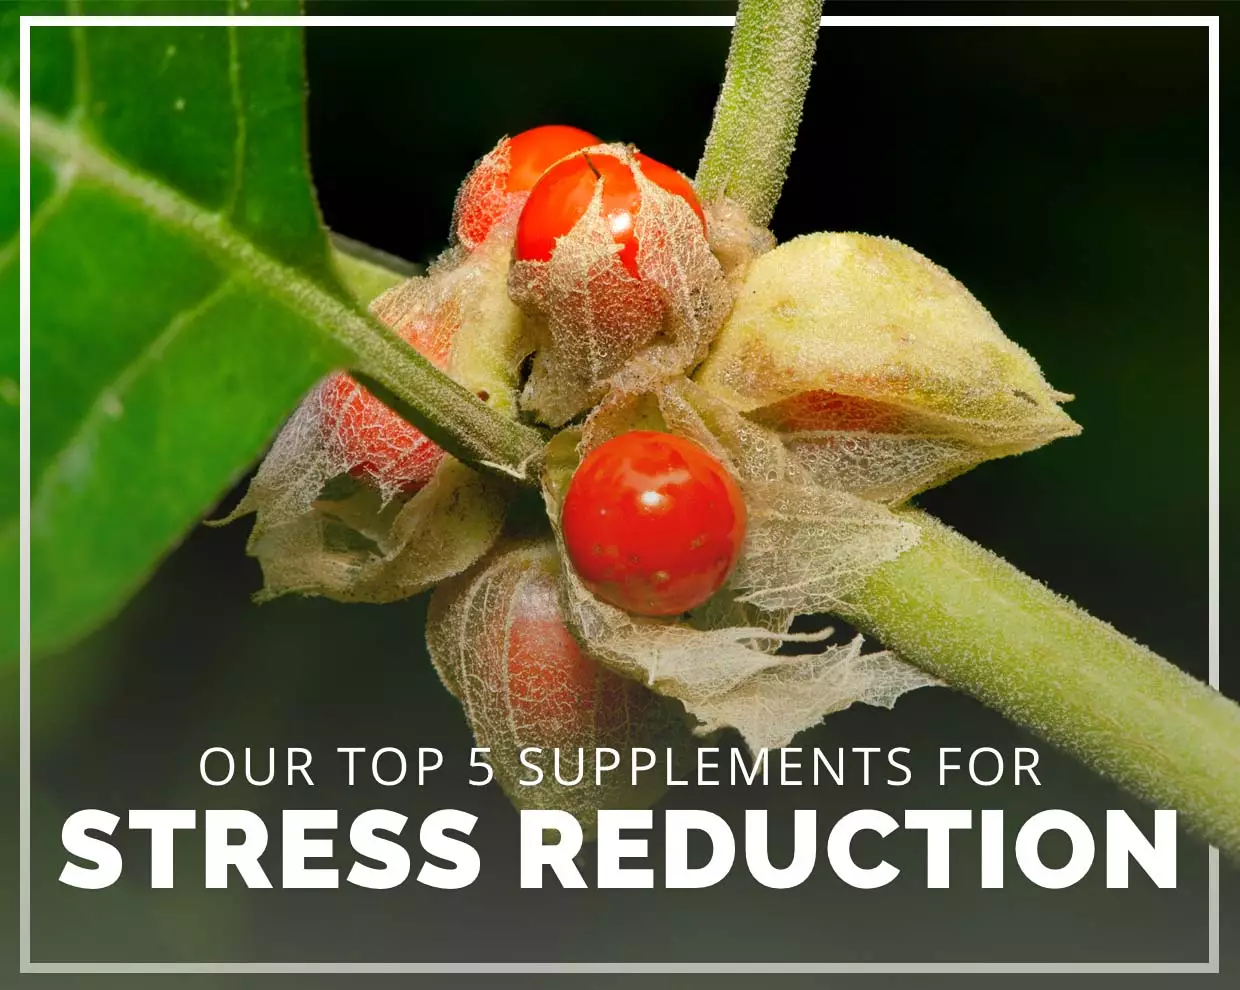 The top 5 supplements that may help to reduce stress